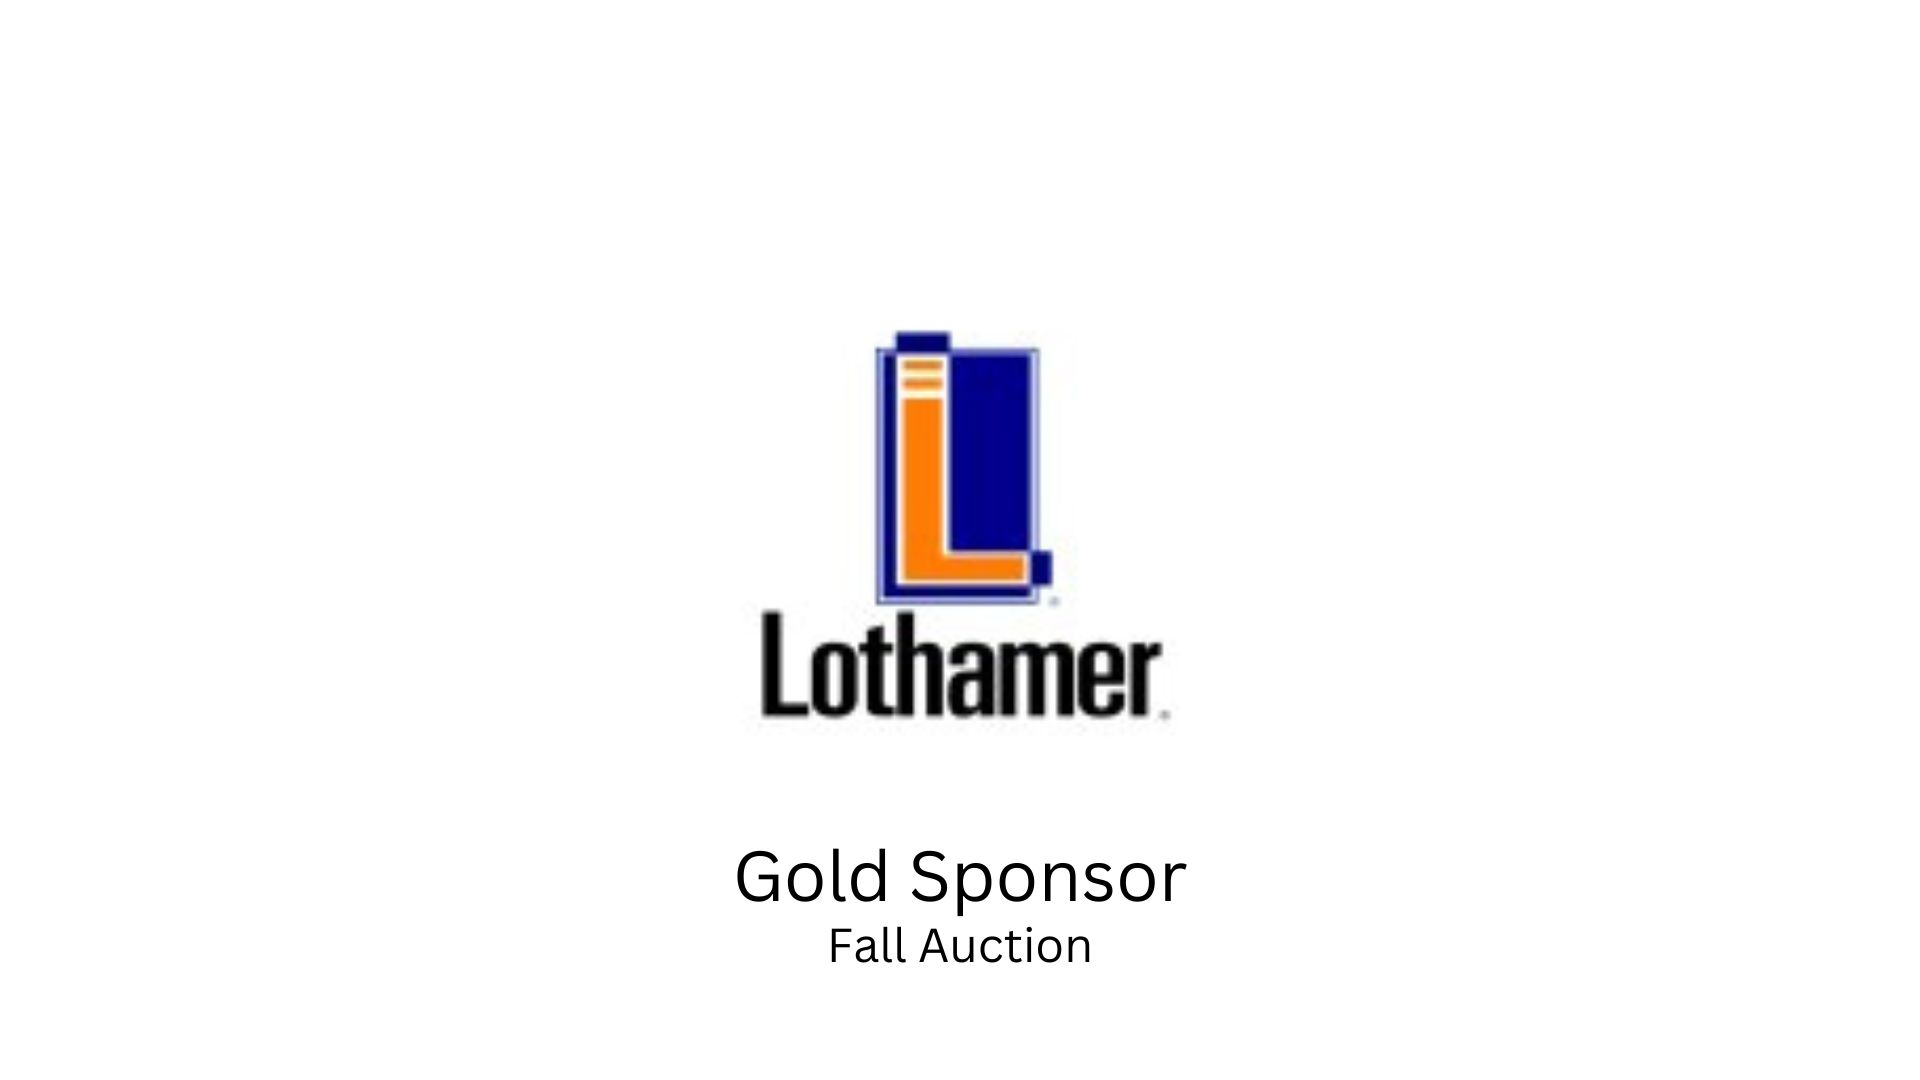 Lothamer Tax Resolution, a Gold Sponsor for the 2022 Fall Auction